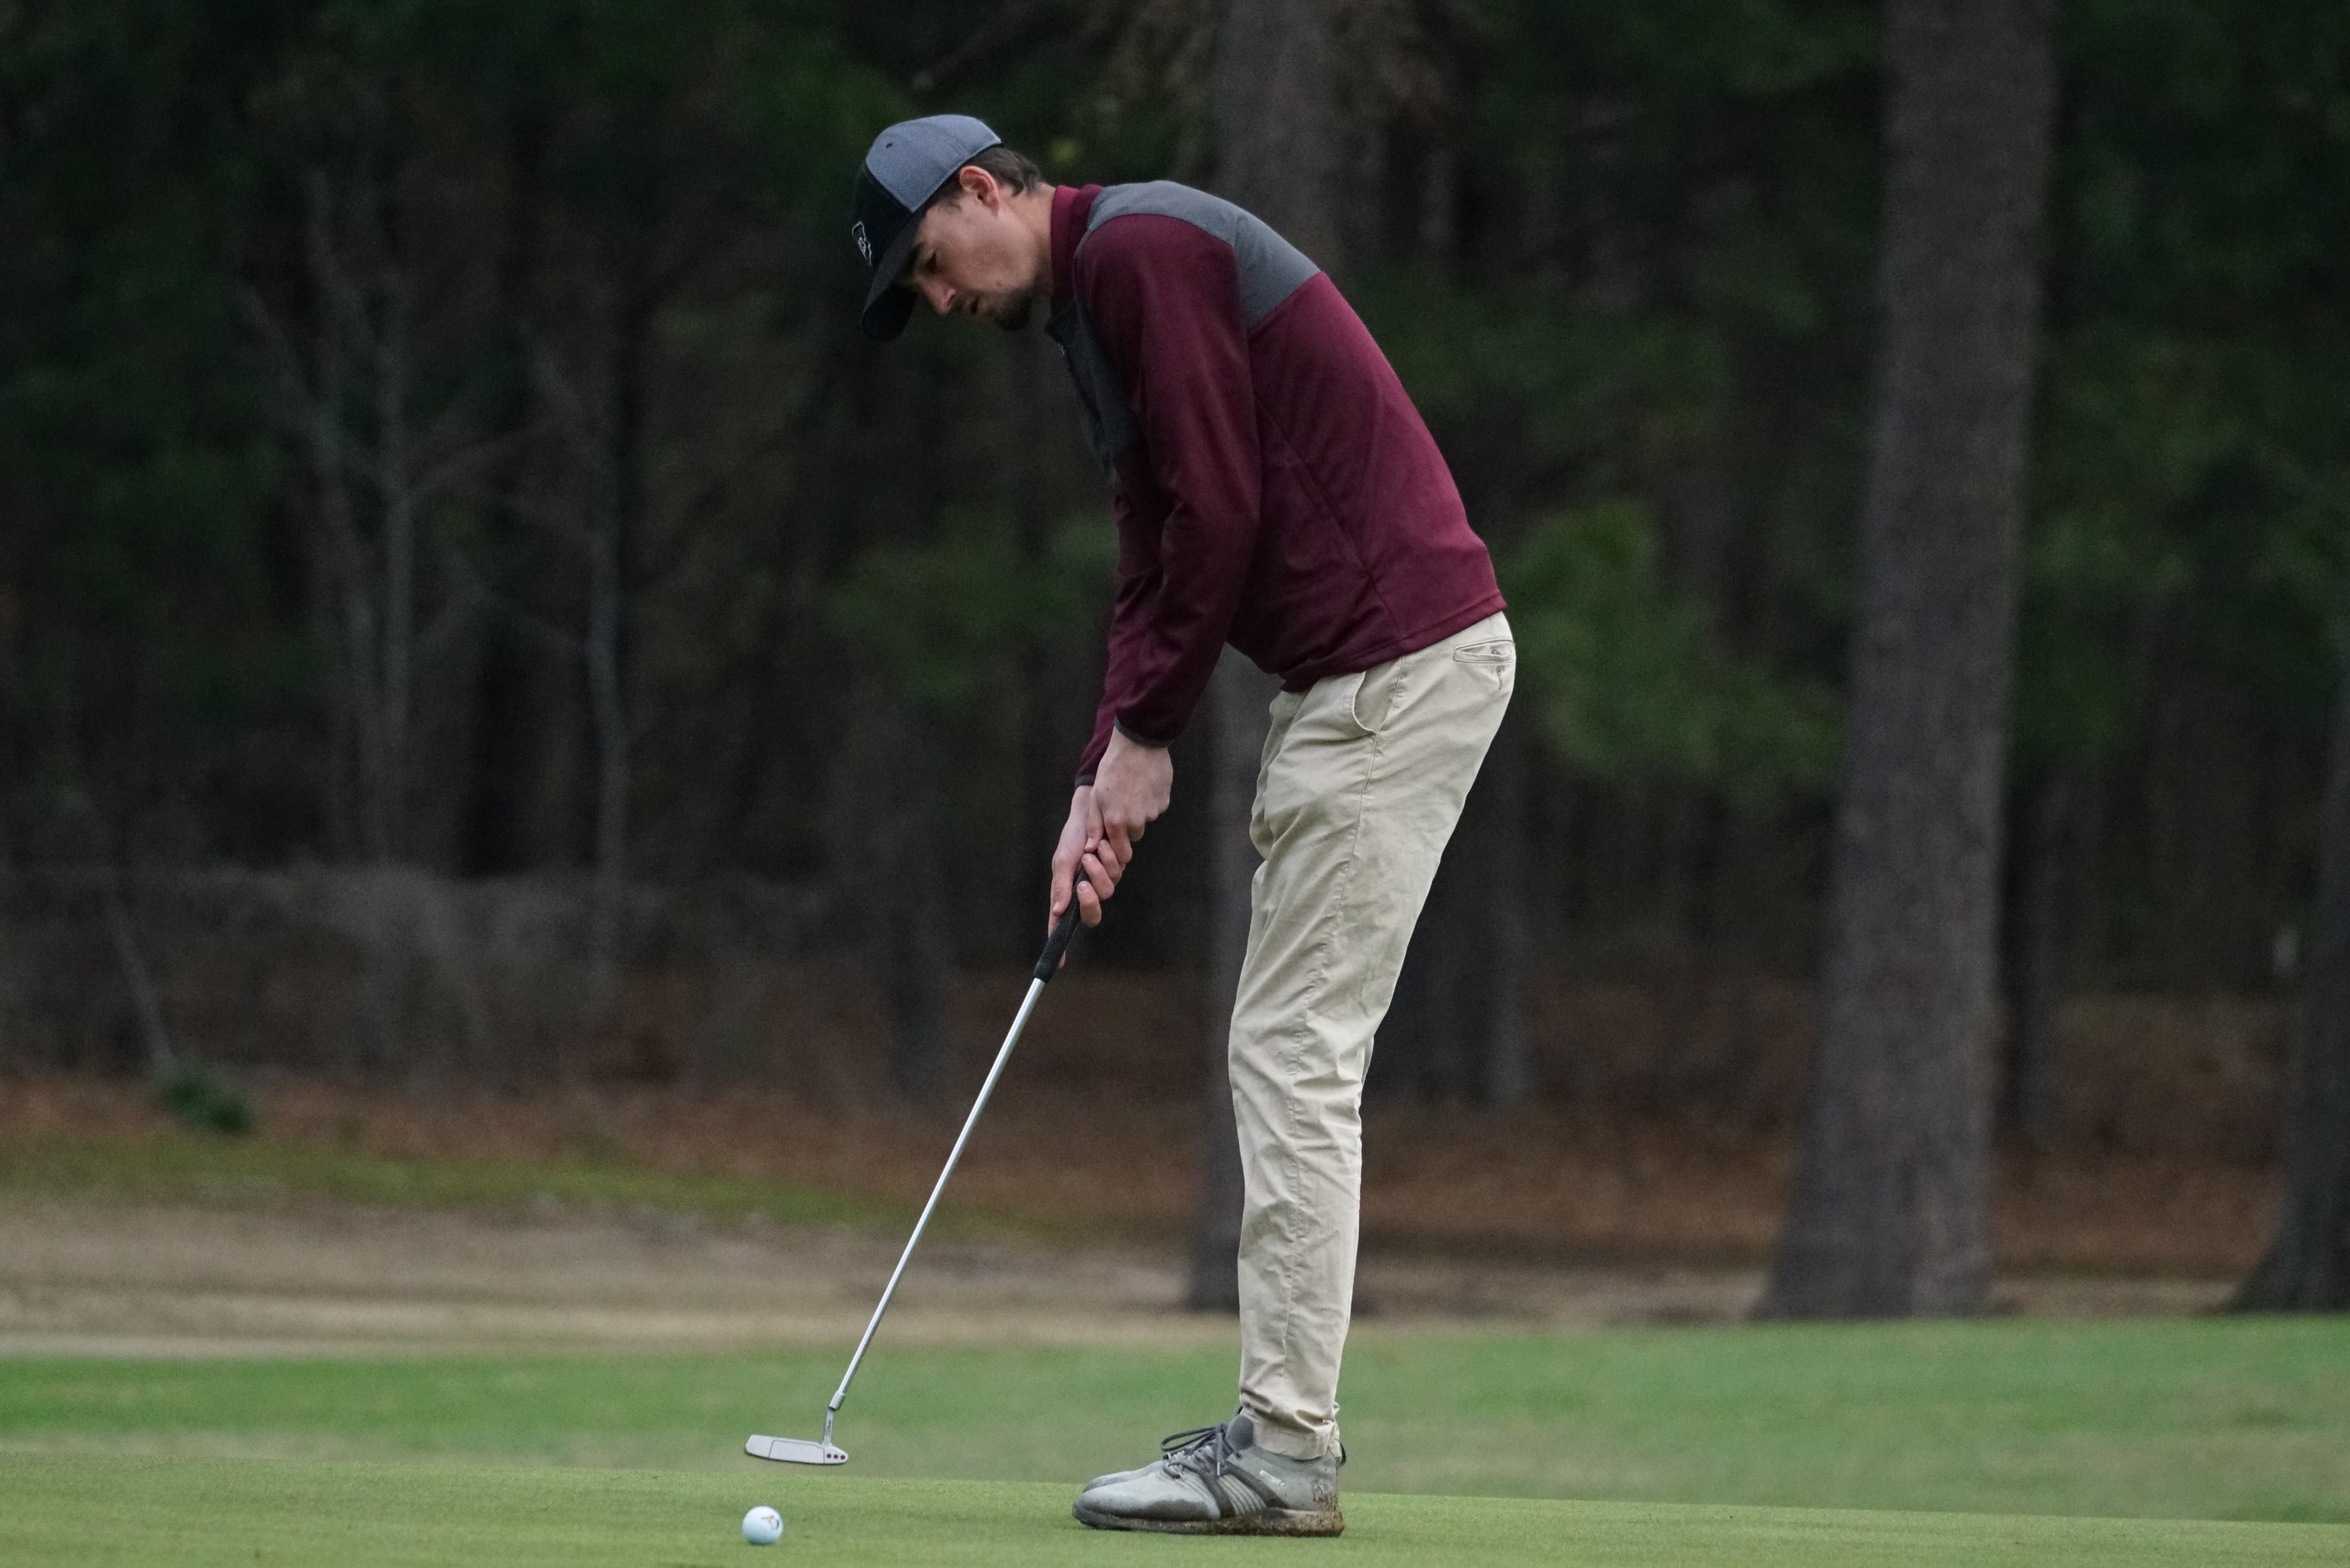 Freshman Aubrey Snell and the Gents finished 12th in the Pinecrest Invitational on Tuesday.